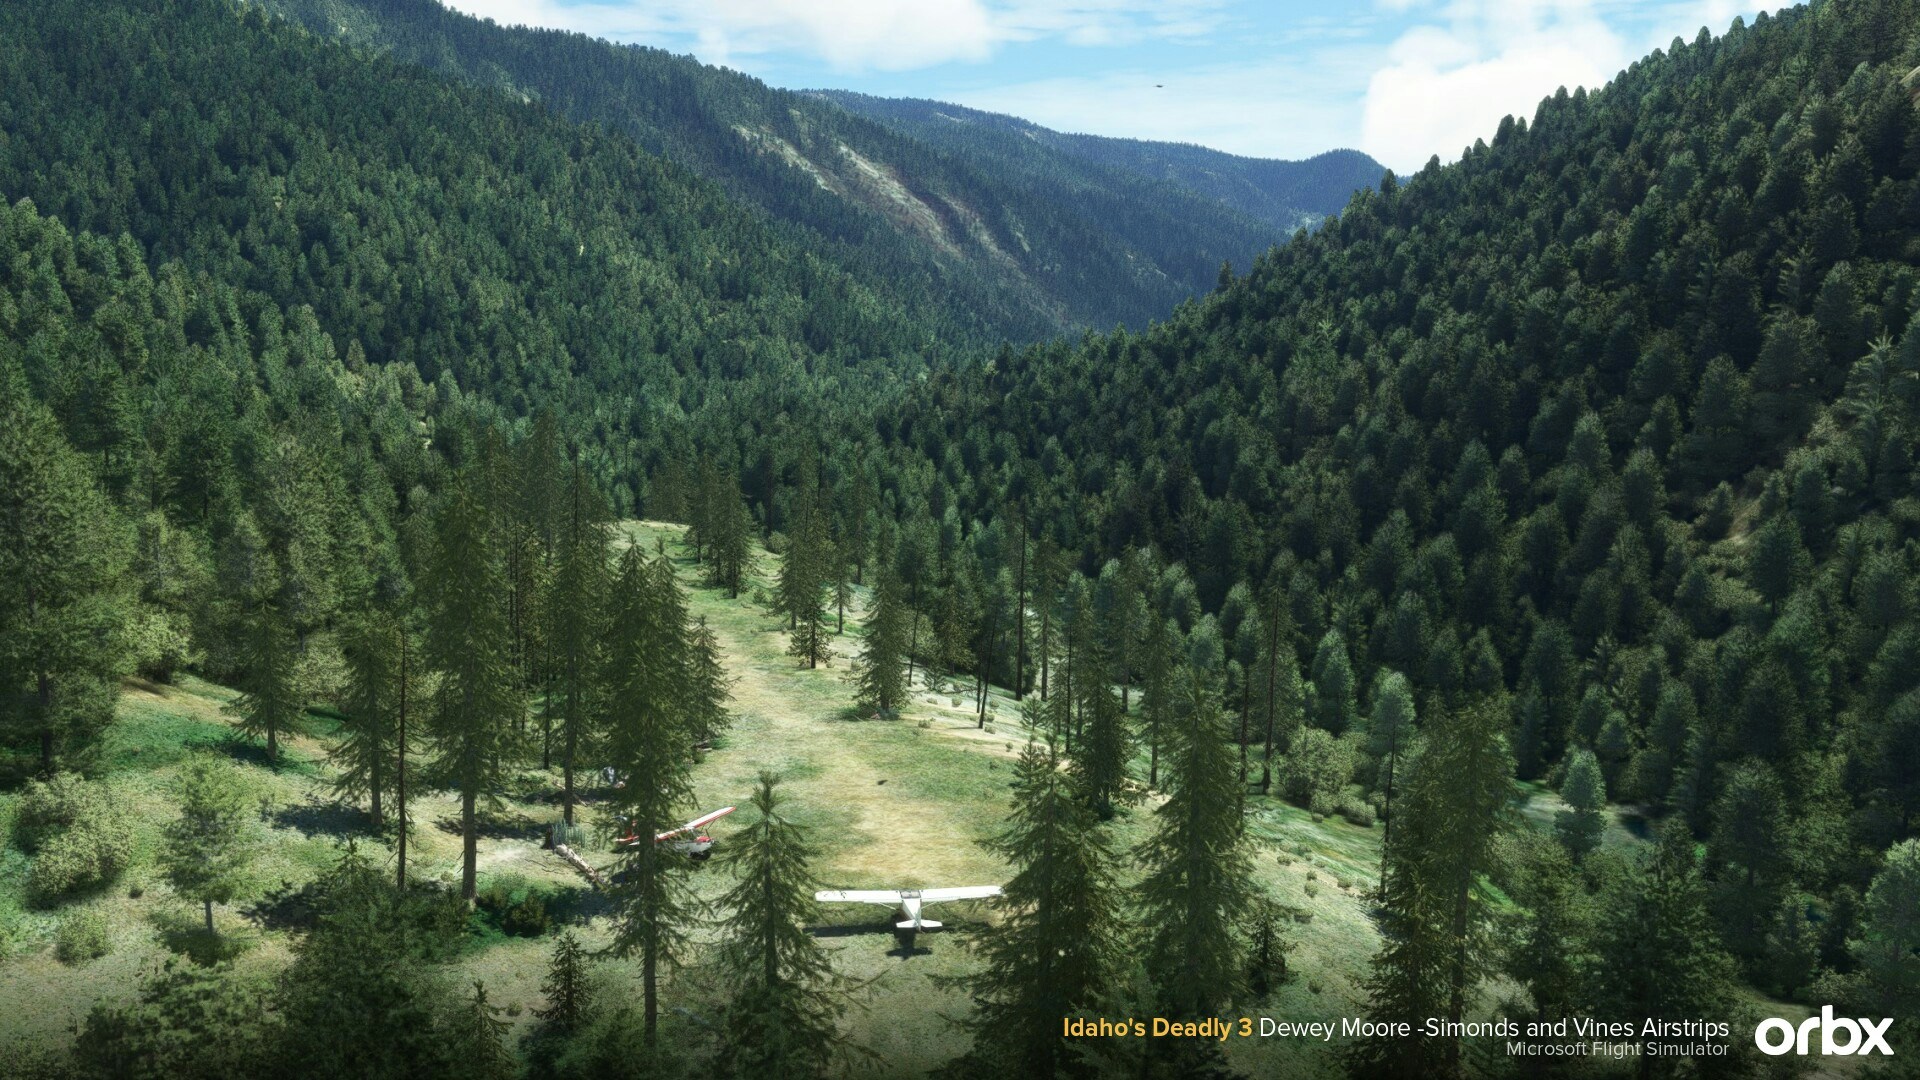 Orbx Releases its Idaho's Deadly 3 for MSFS